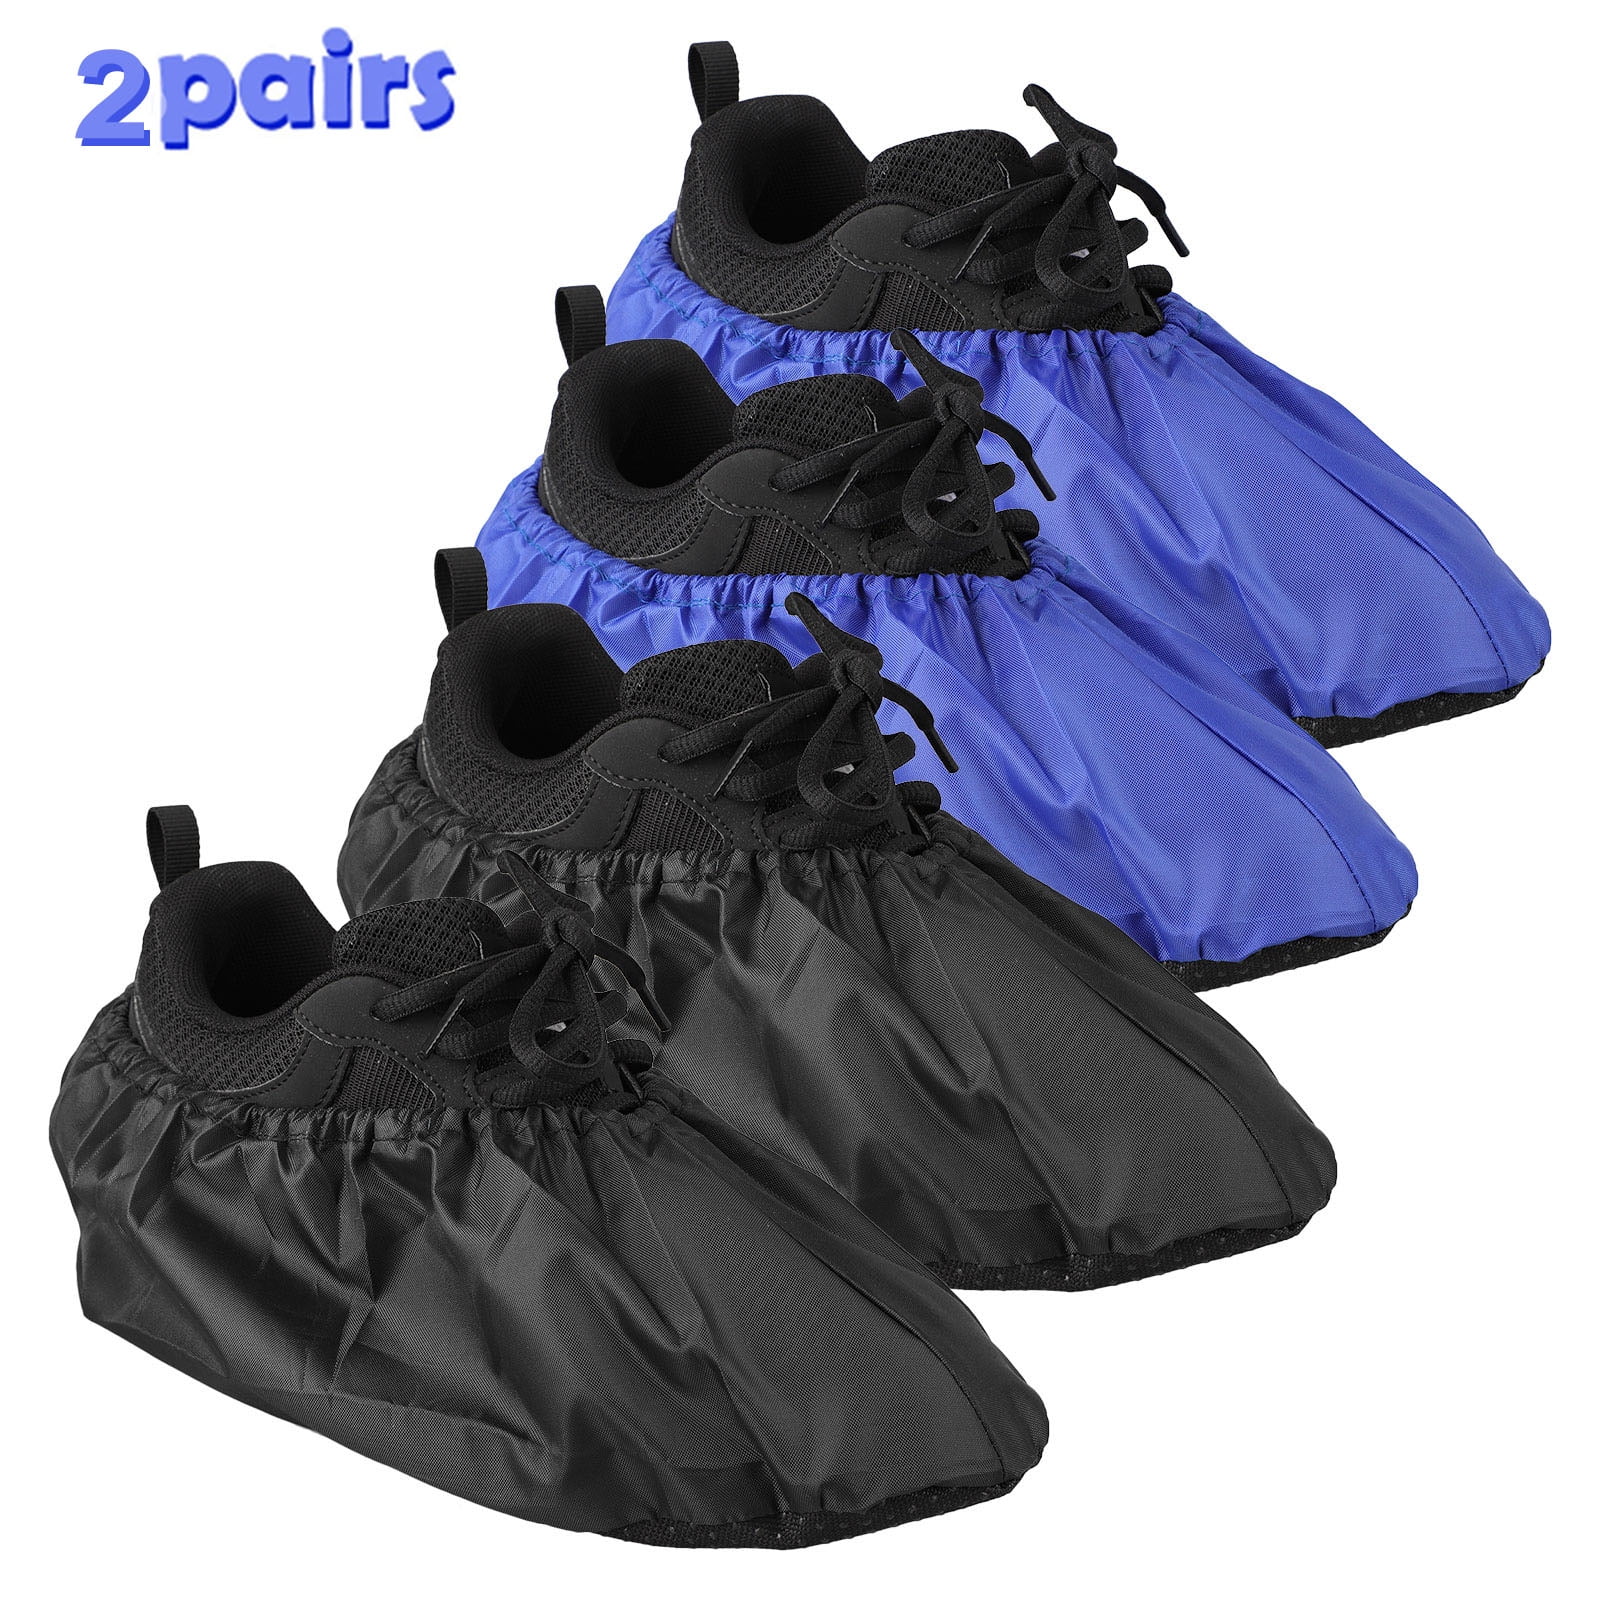 2 Pairs Waterproof Shoe Covers Washable Reusable Non Slip Overshoes Booties US 